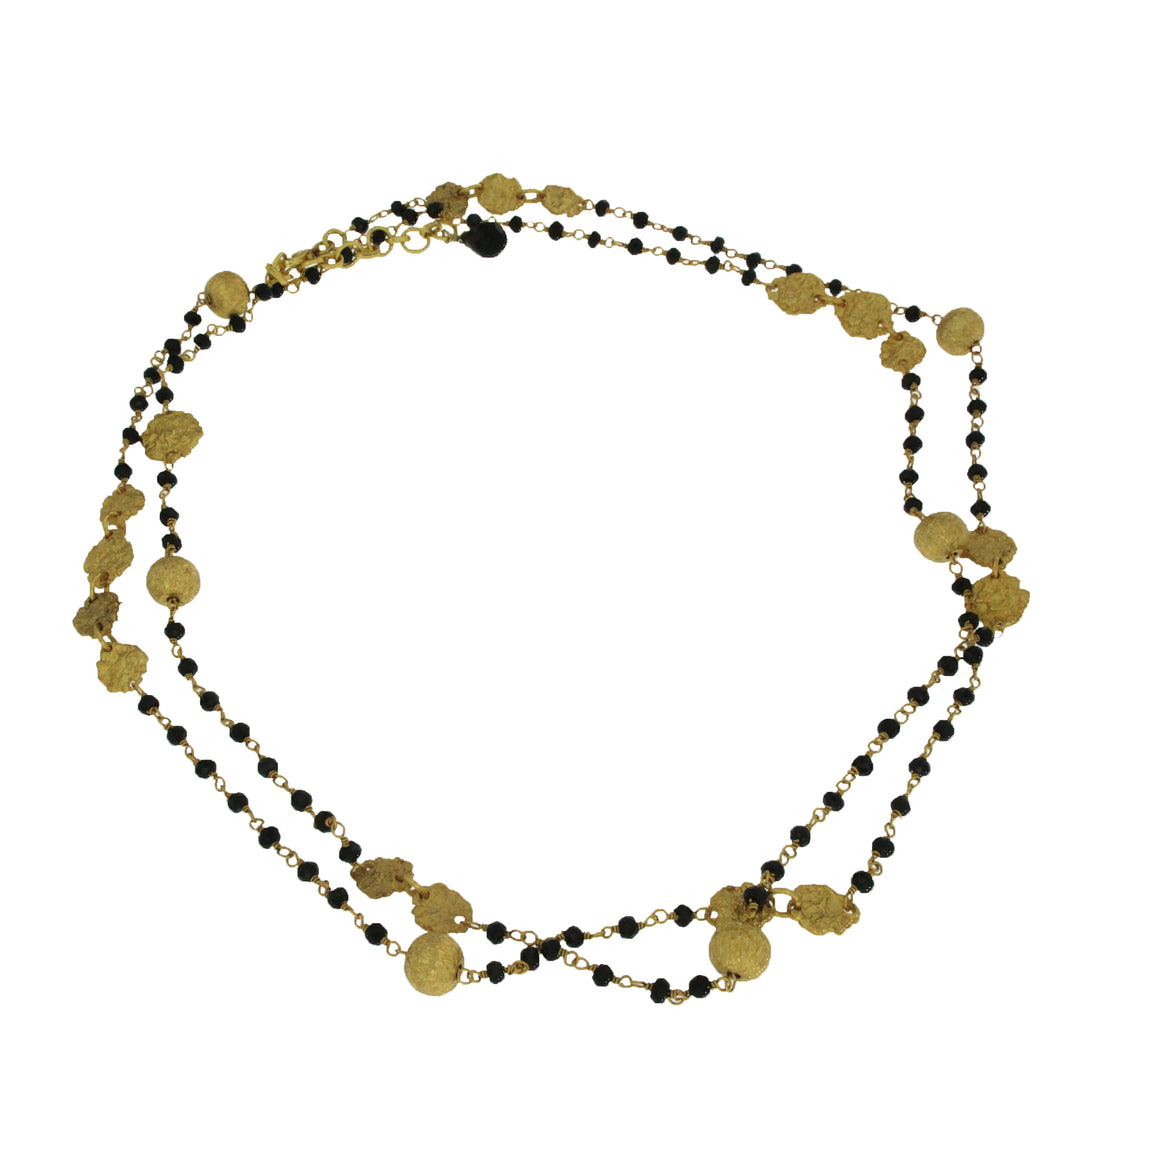 Beads of faceted Black Onyx interwoven with beads and charms of gold. Can easily be worn in 2 layers. A dramatic layering necklace that can be work for any occasion. Metal used is 22 carat Vermeil over Sterling Silver.